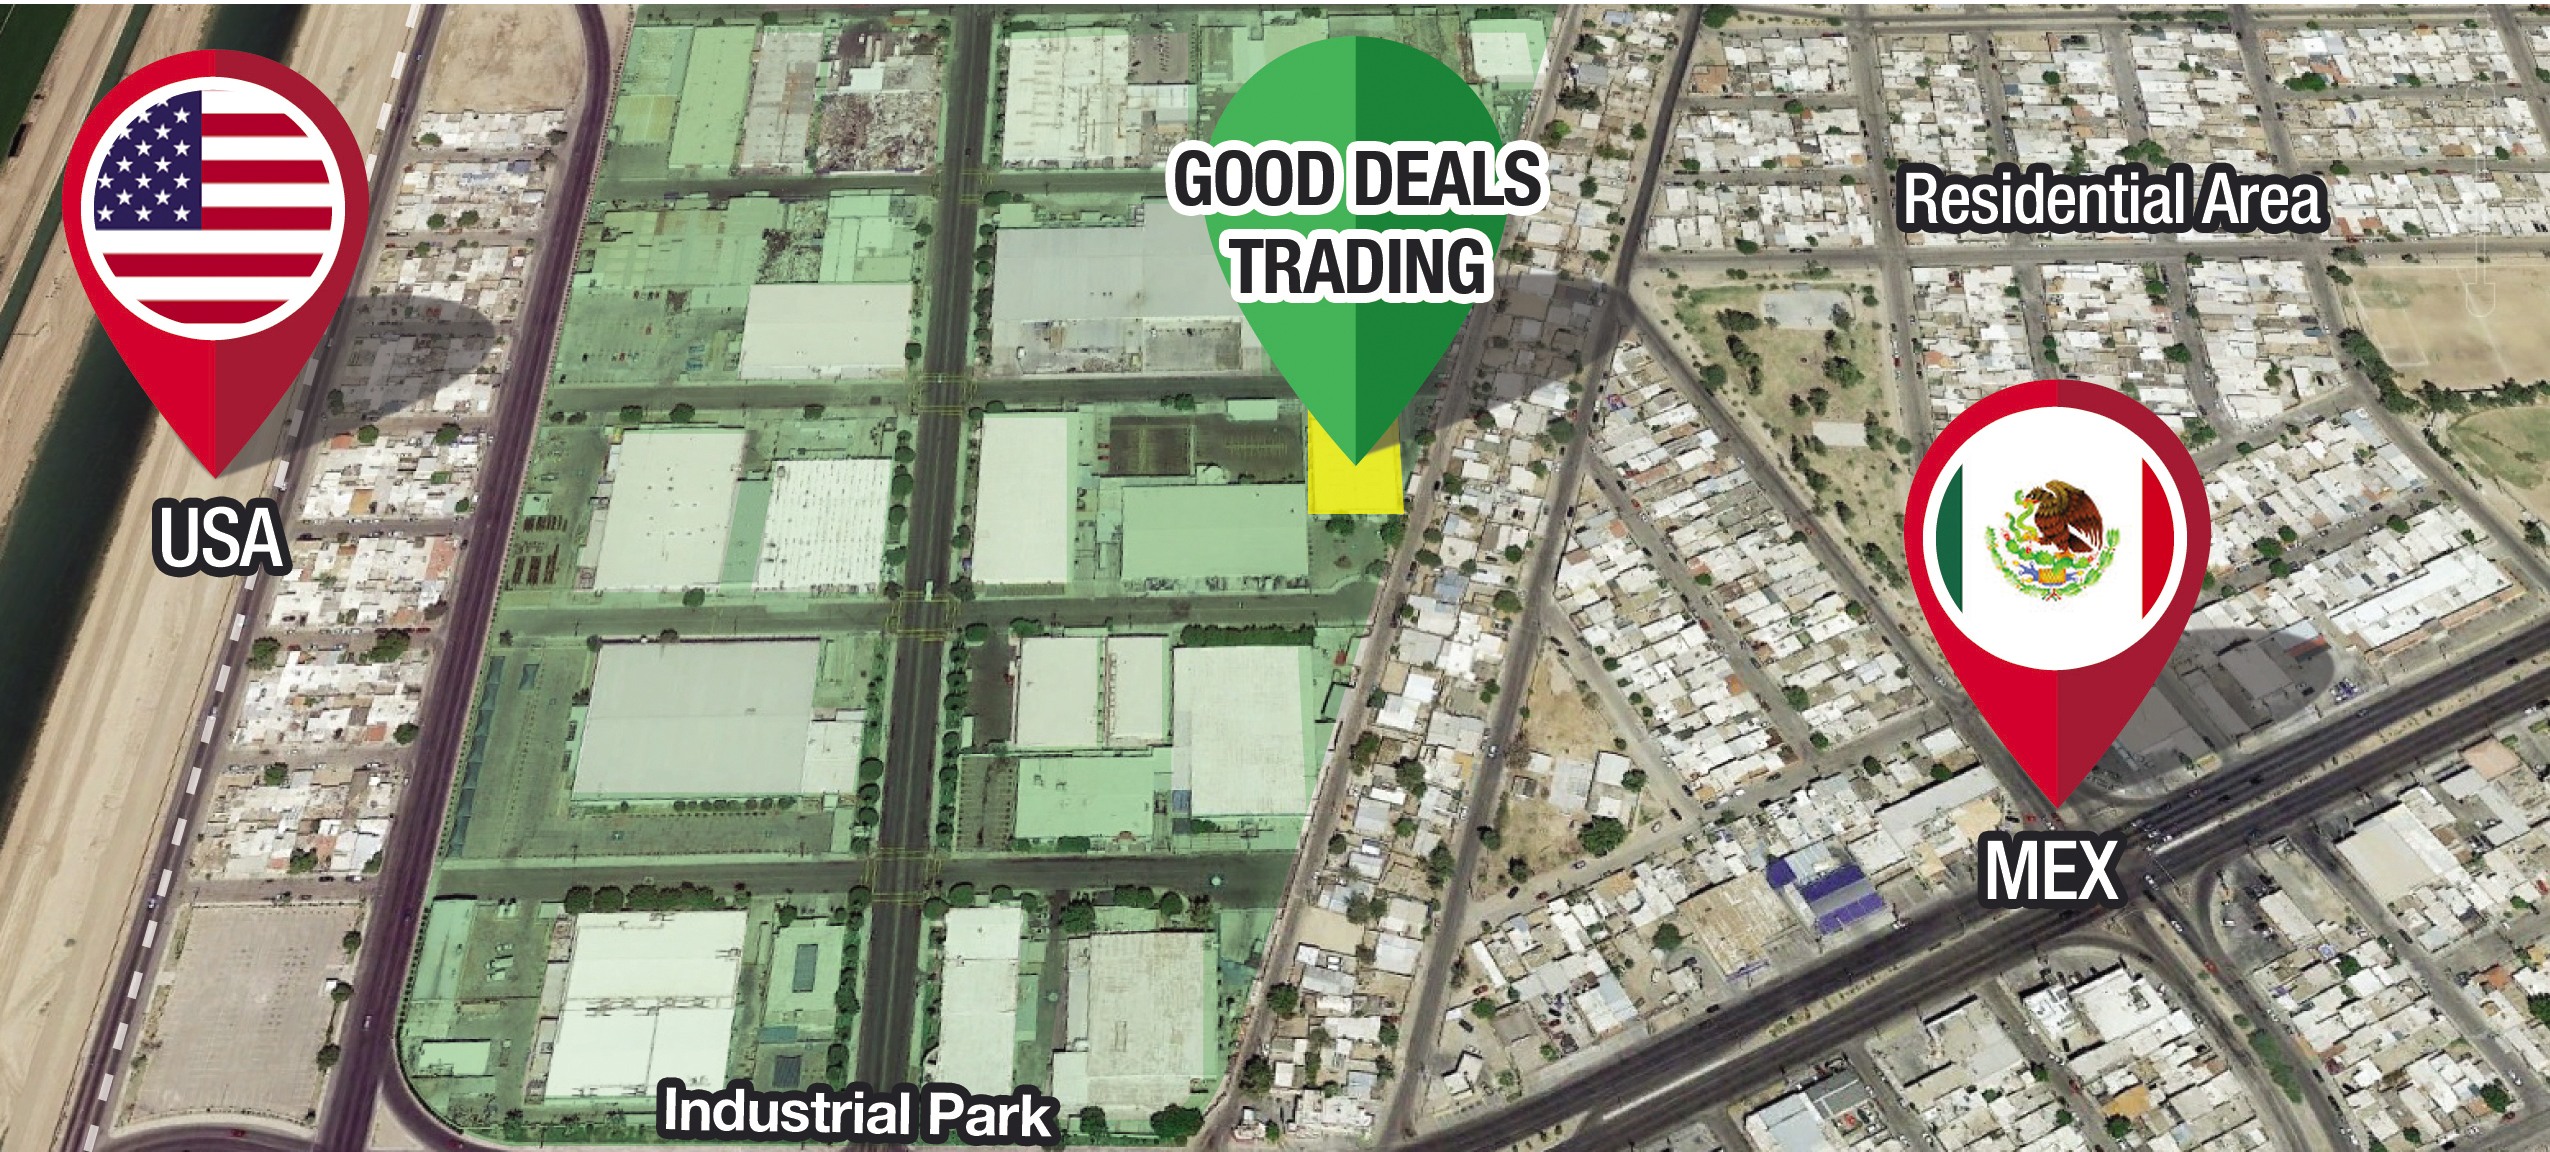 Good Deals Trading Location - PIMSA Industrial Parks in Mexico